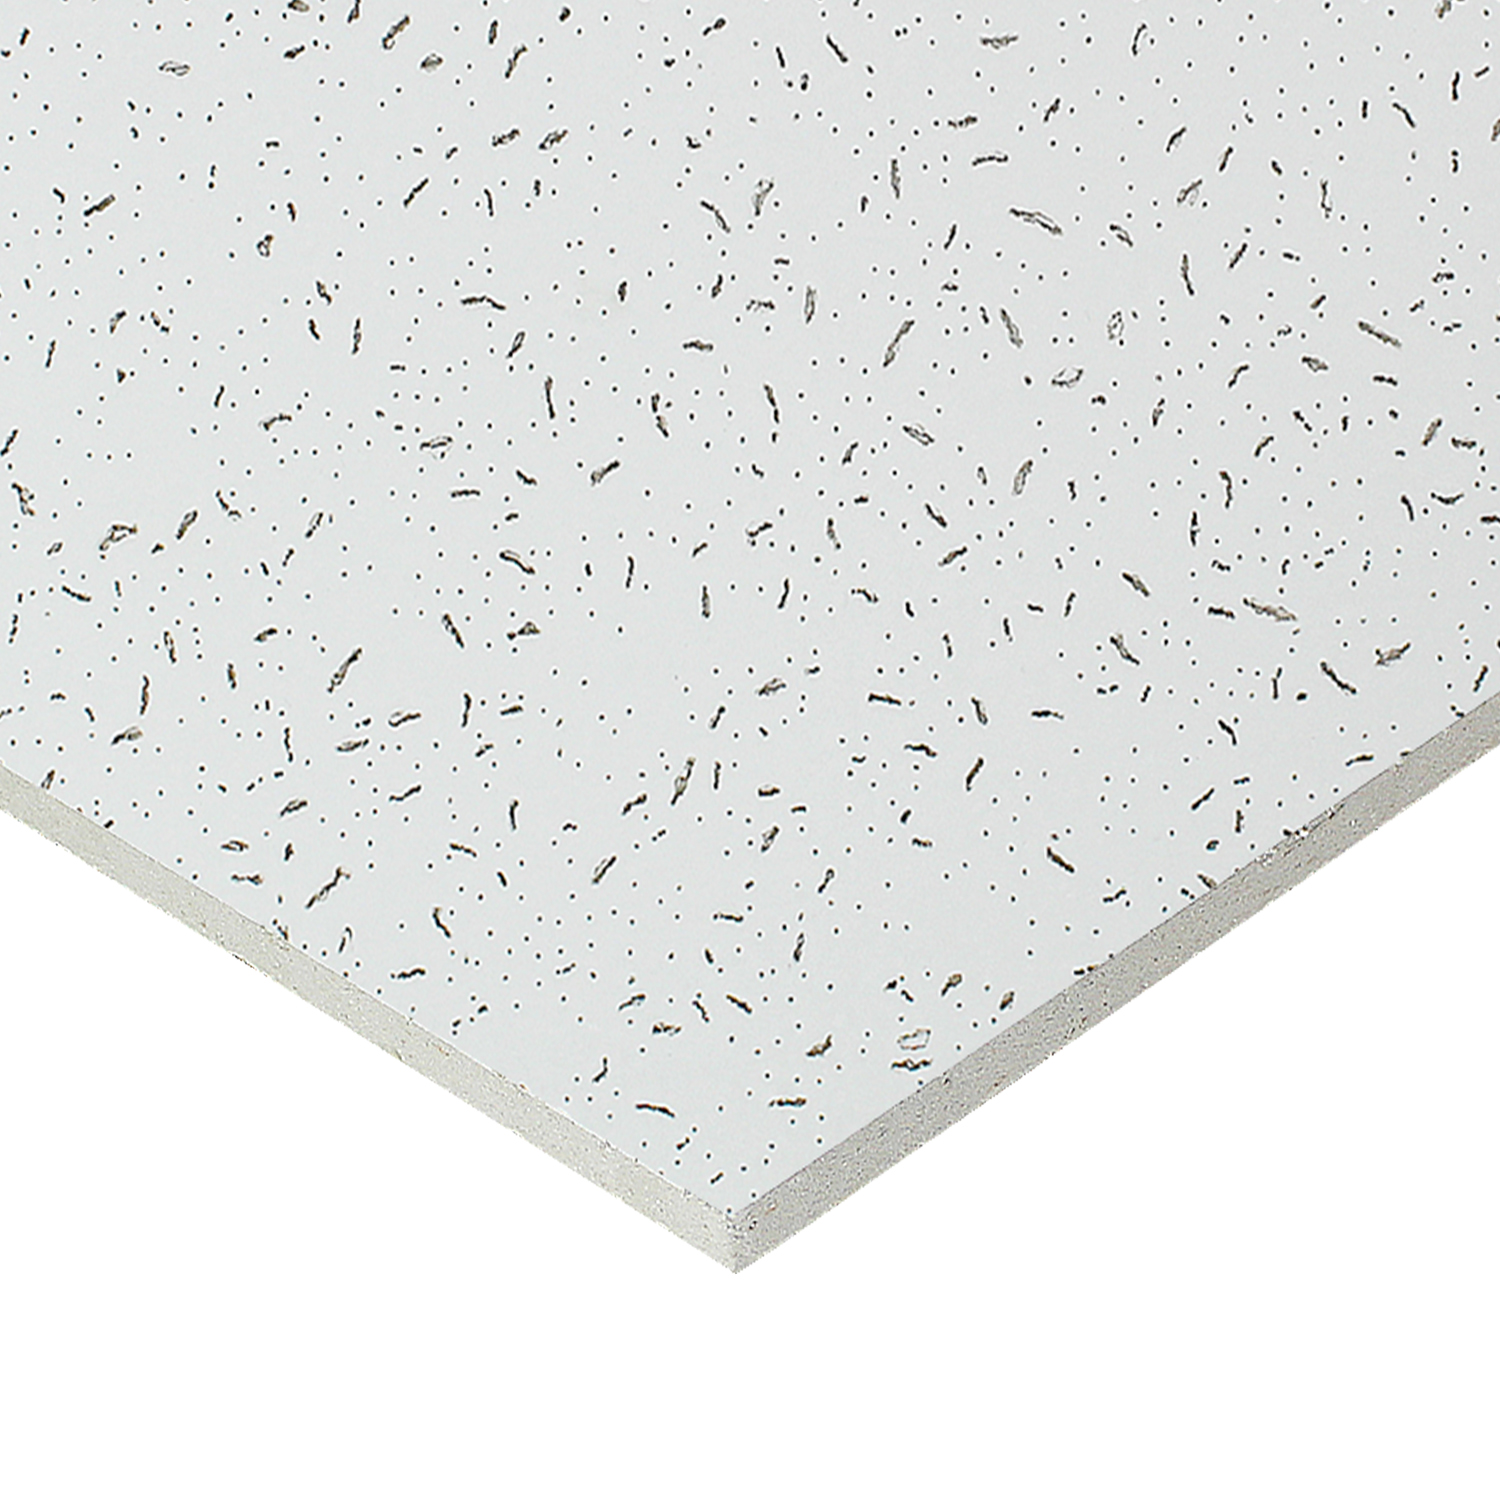 ND FISSURED Suspended ceiling tile 600*600 (Box Qty: 10)